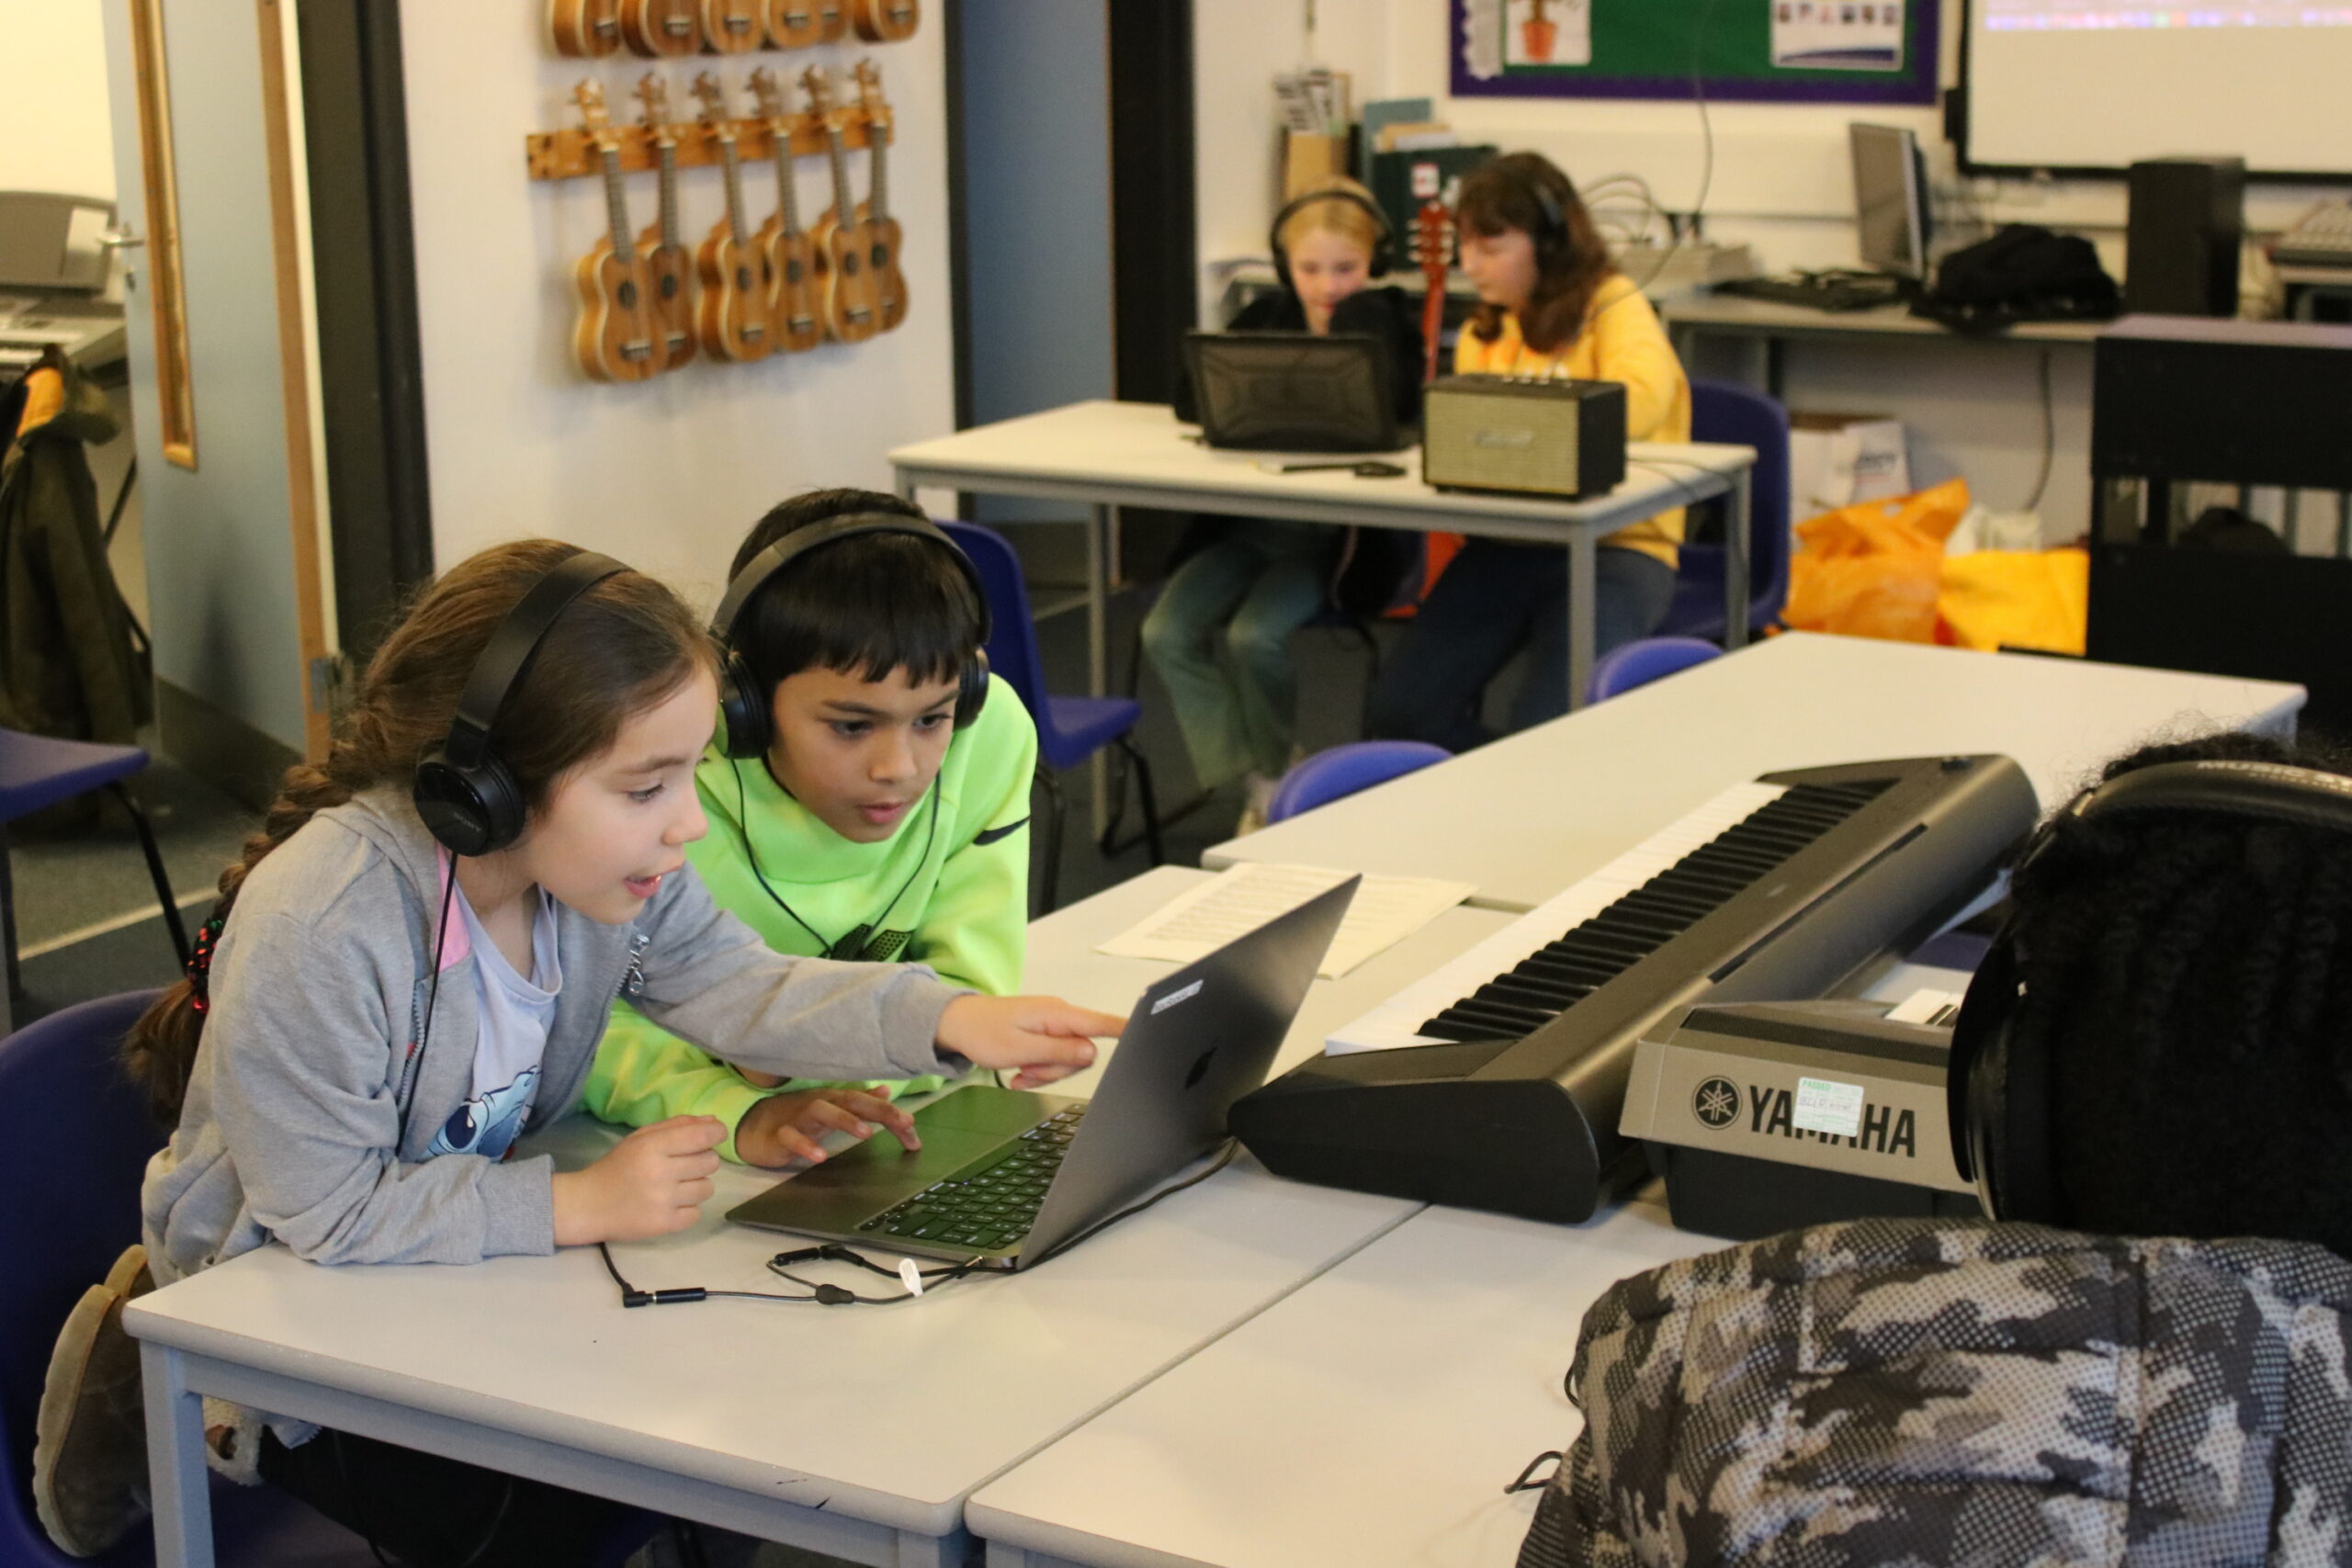 Two Children Work Together On A Computer, Two Others Are In The Background